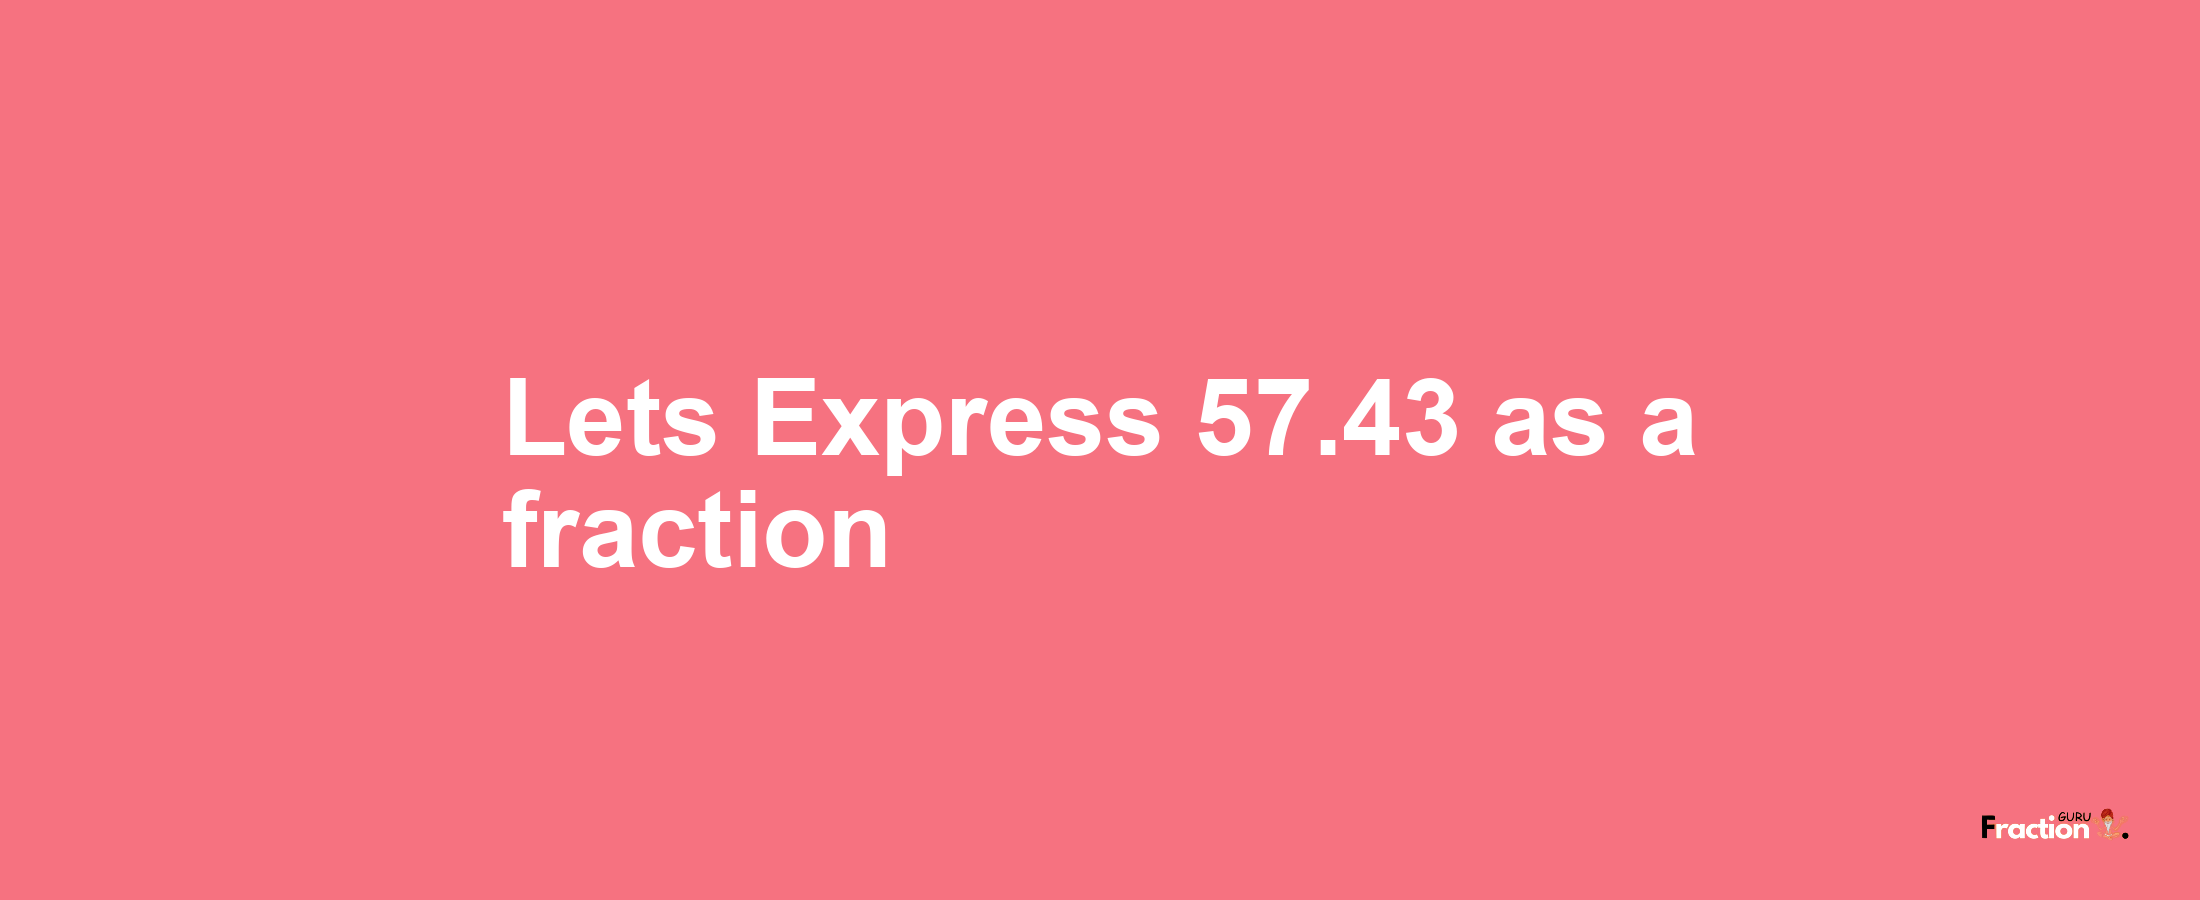 Lets Express 57.43 as afraction